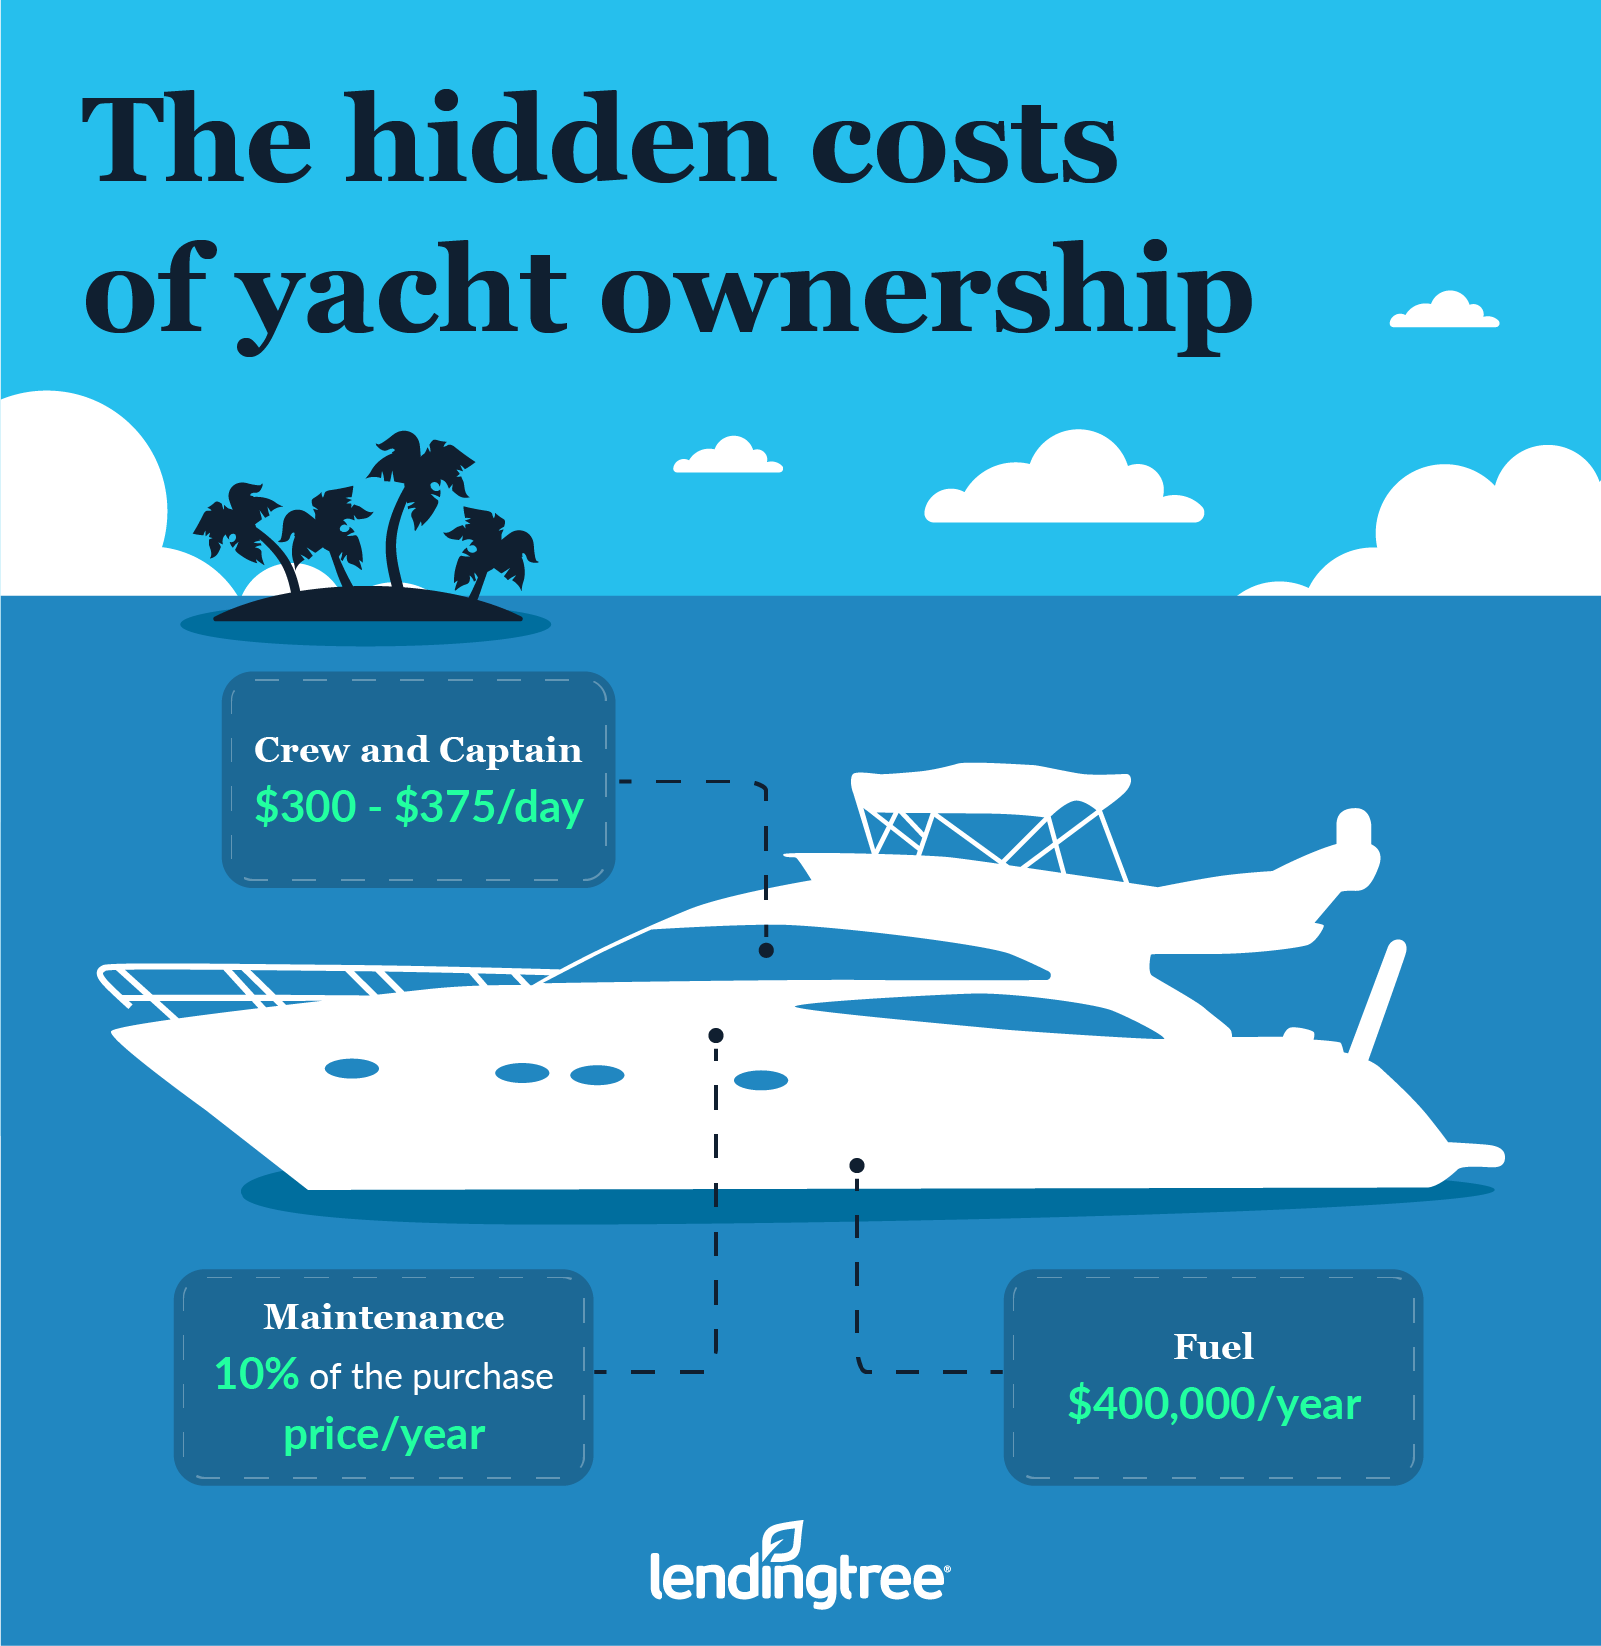 The hidden costs of owning a yacht